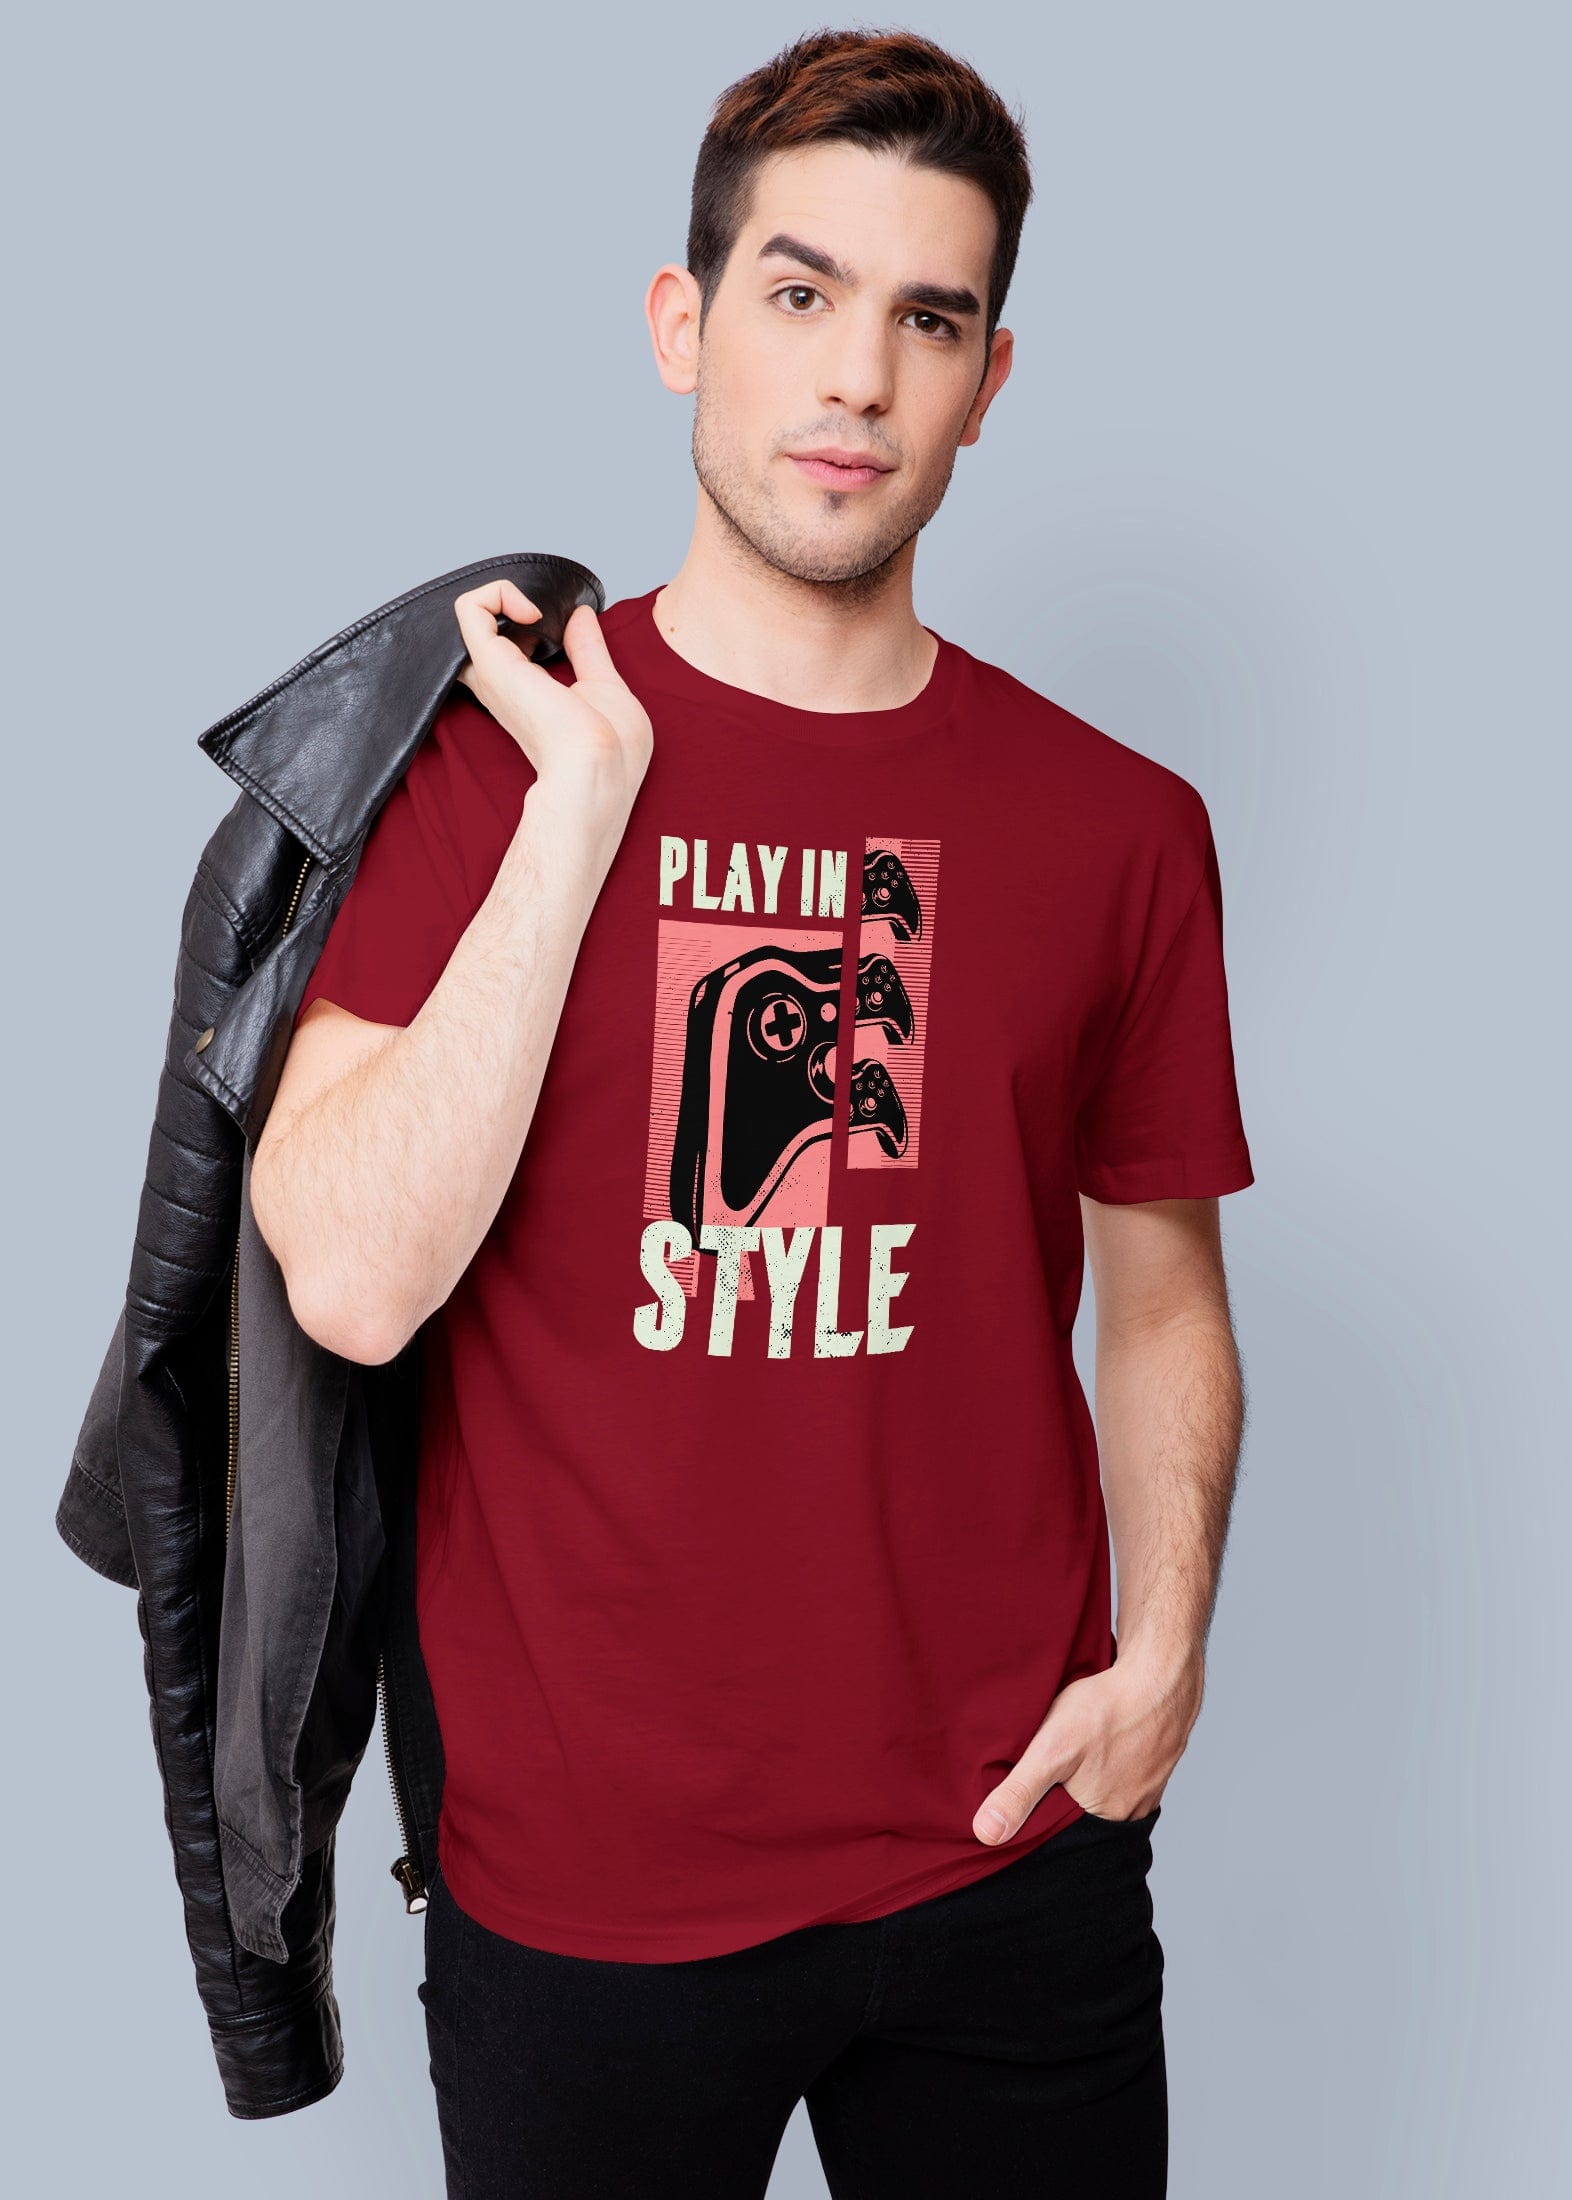 Play In Style Printed Half Sleeve Premium Cotton T-shirt For Men